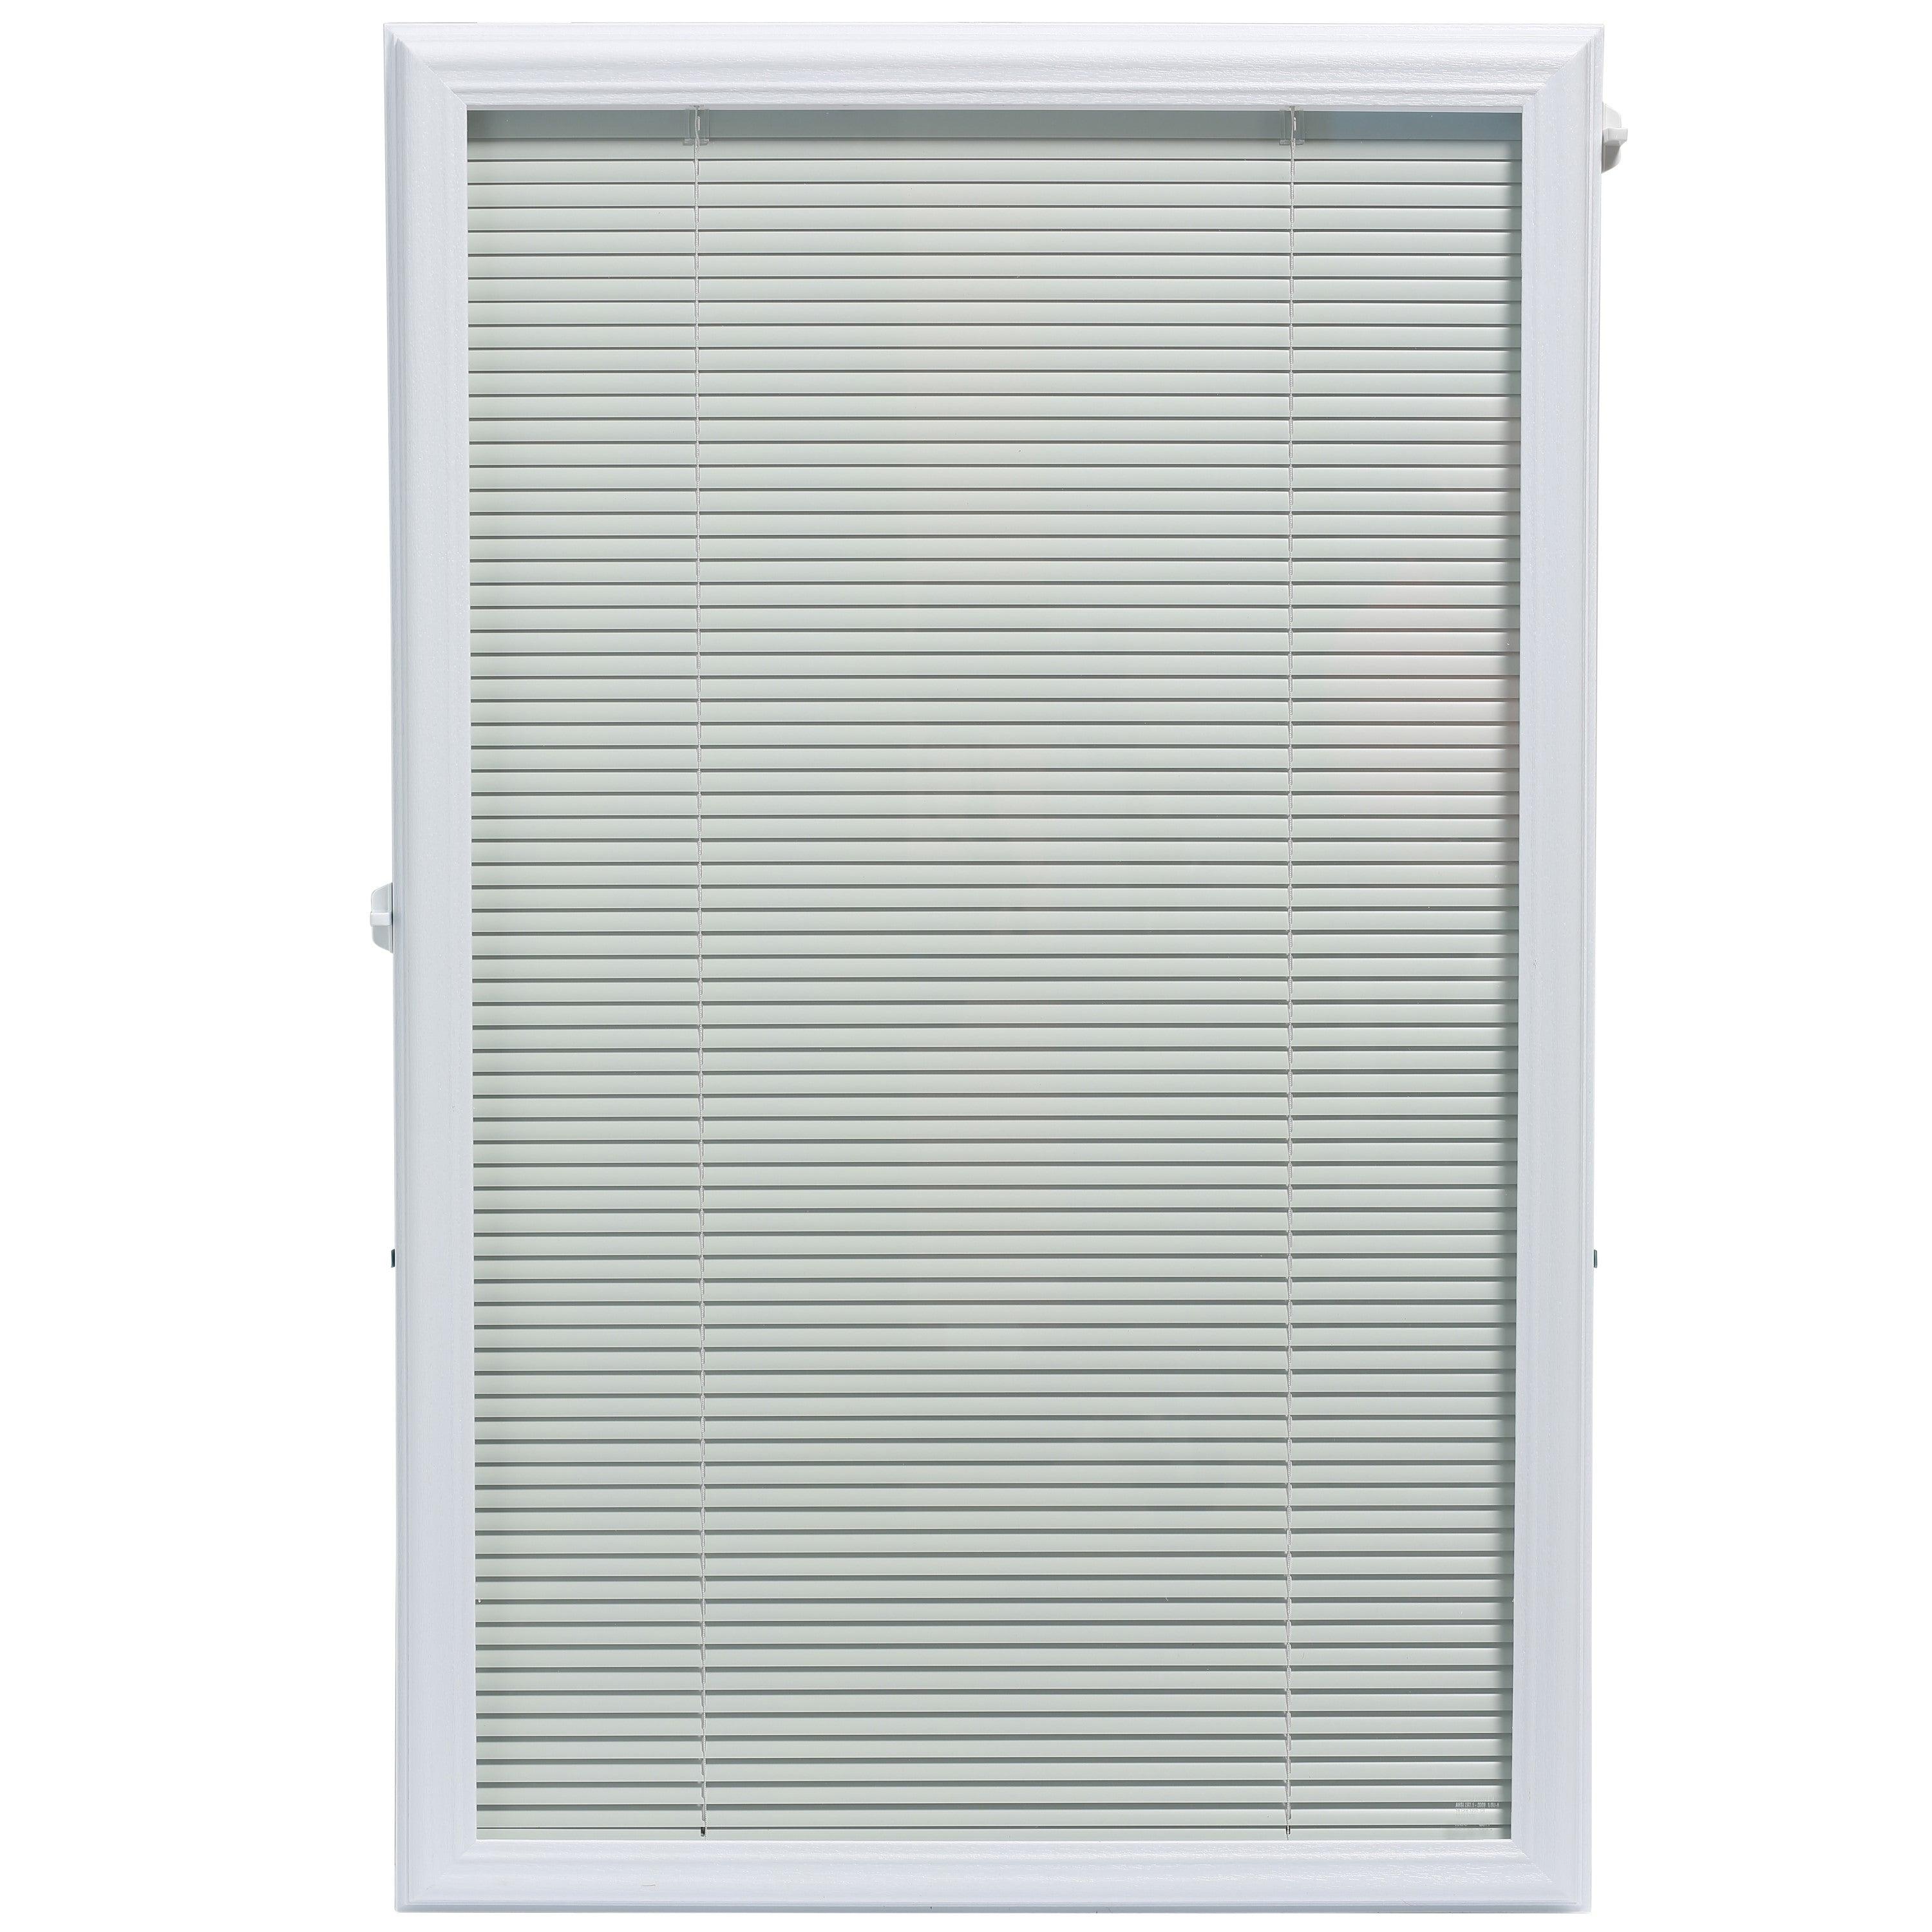 Raise & Lower Blinds Glass and Frame Kit (Half Lite) - Pease Doors: The Door Store